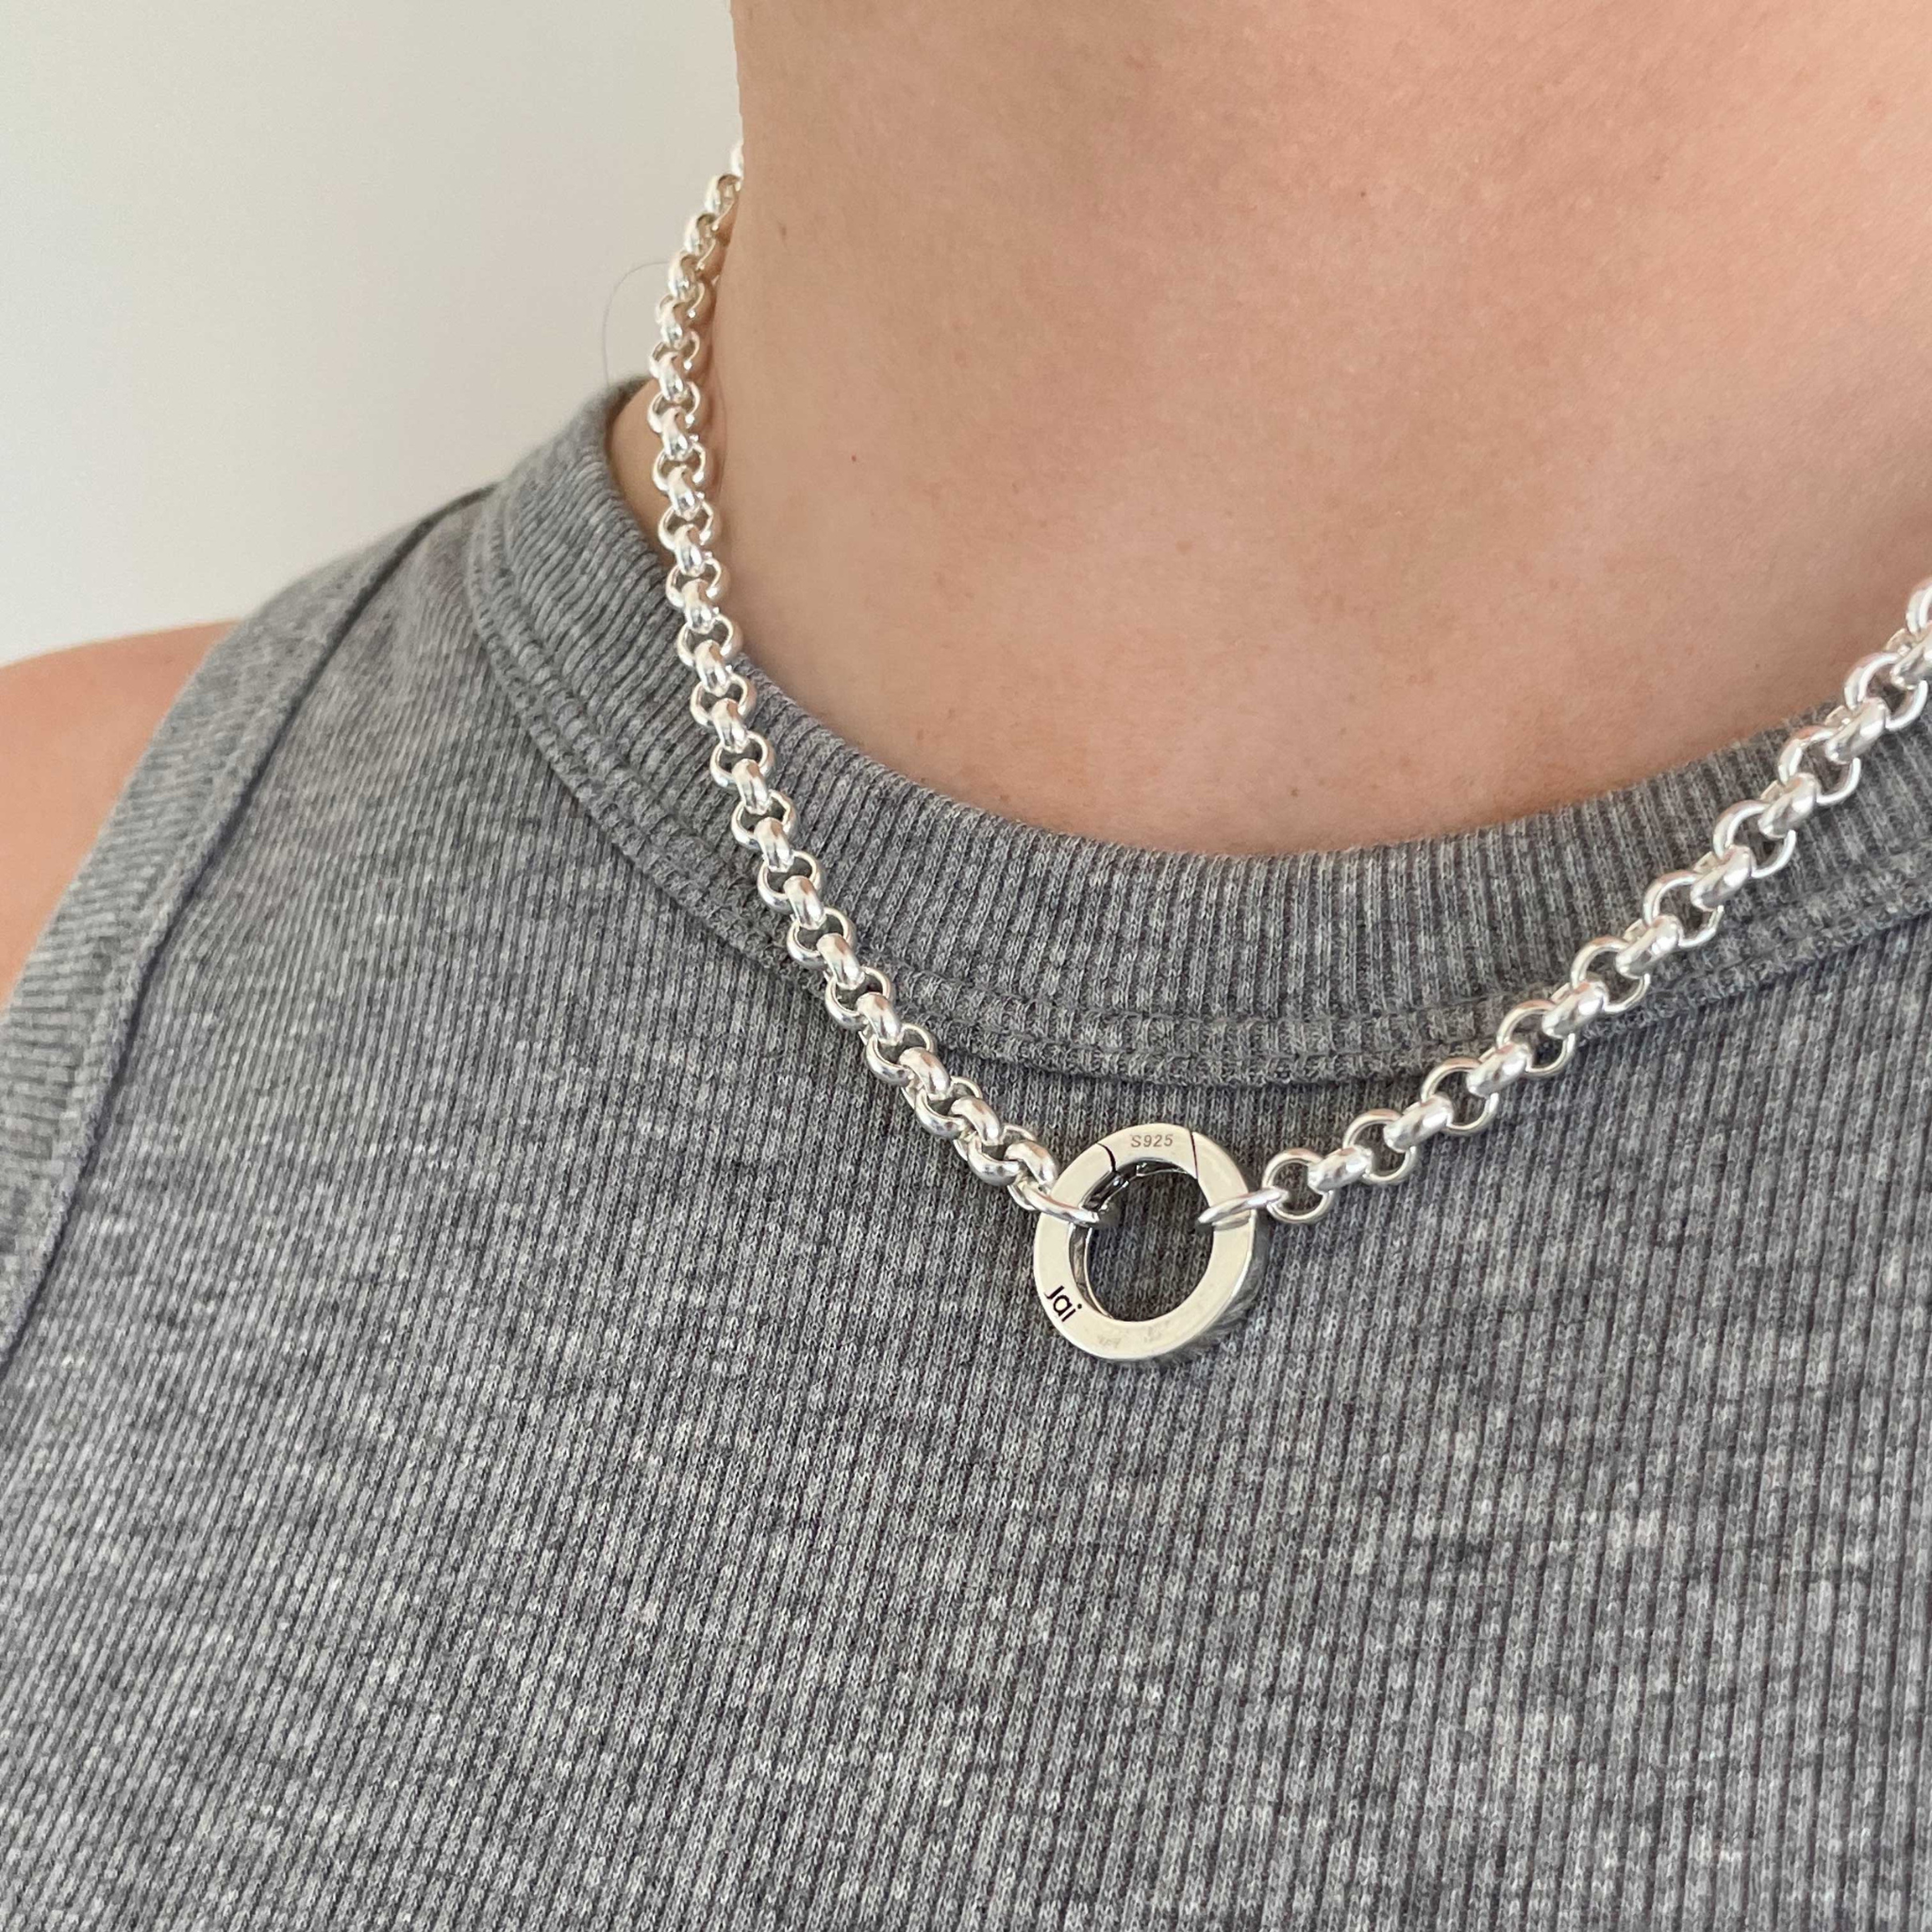 Rolo Chain Link Chain Necklace Men Stainless Steel Silver Chain Necklace